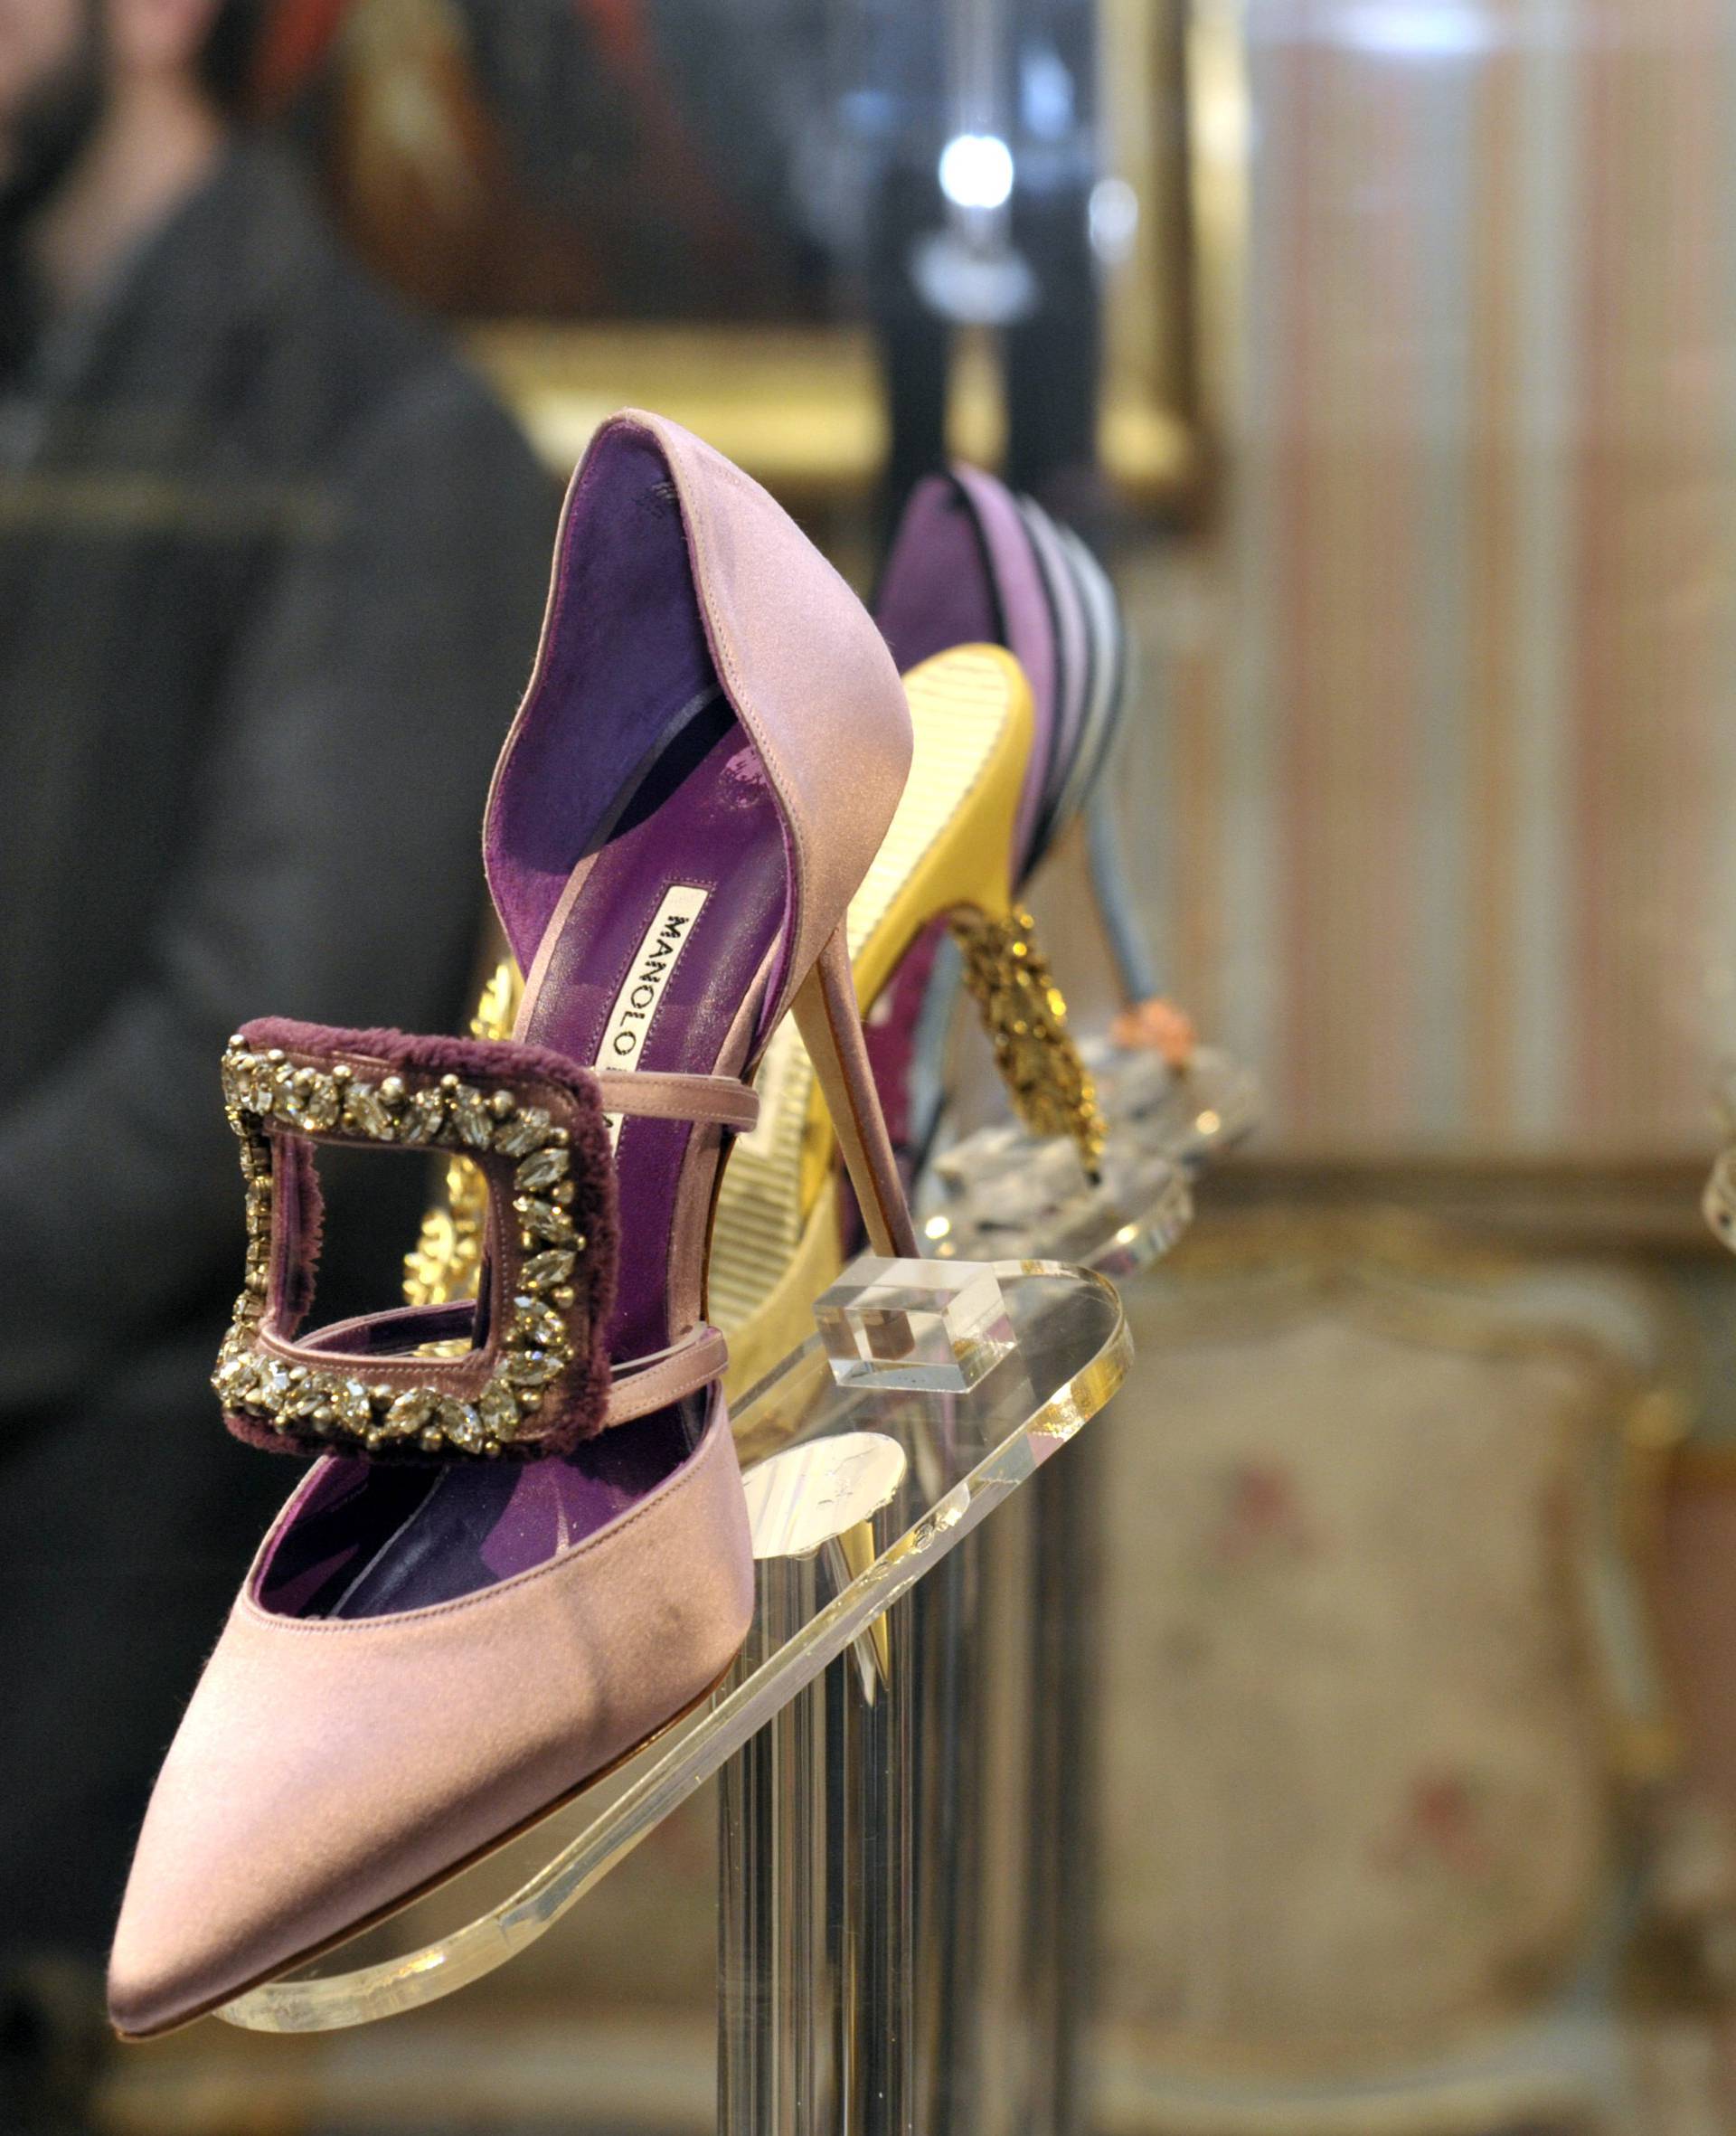 Milan - Exhibition of Manolo Blahnik - the art of shoes